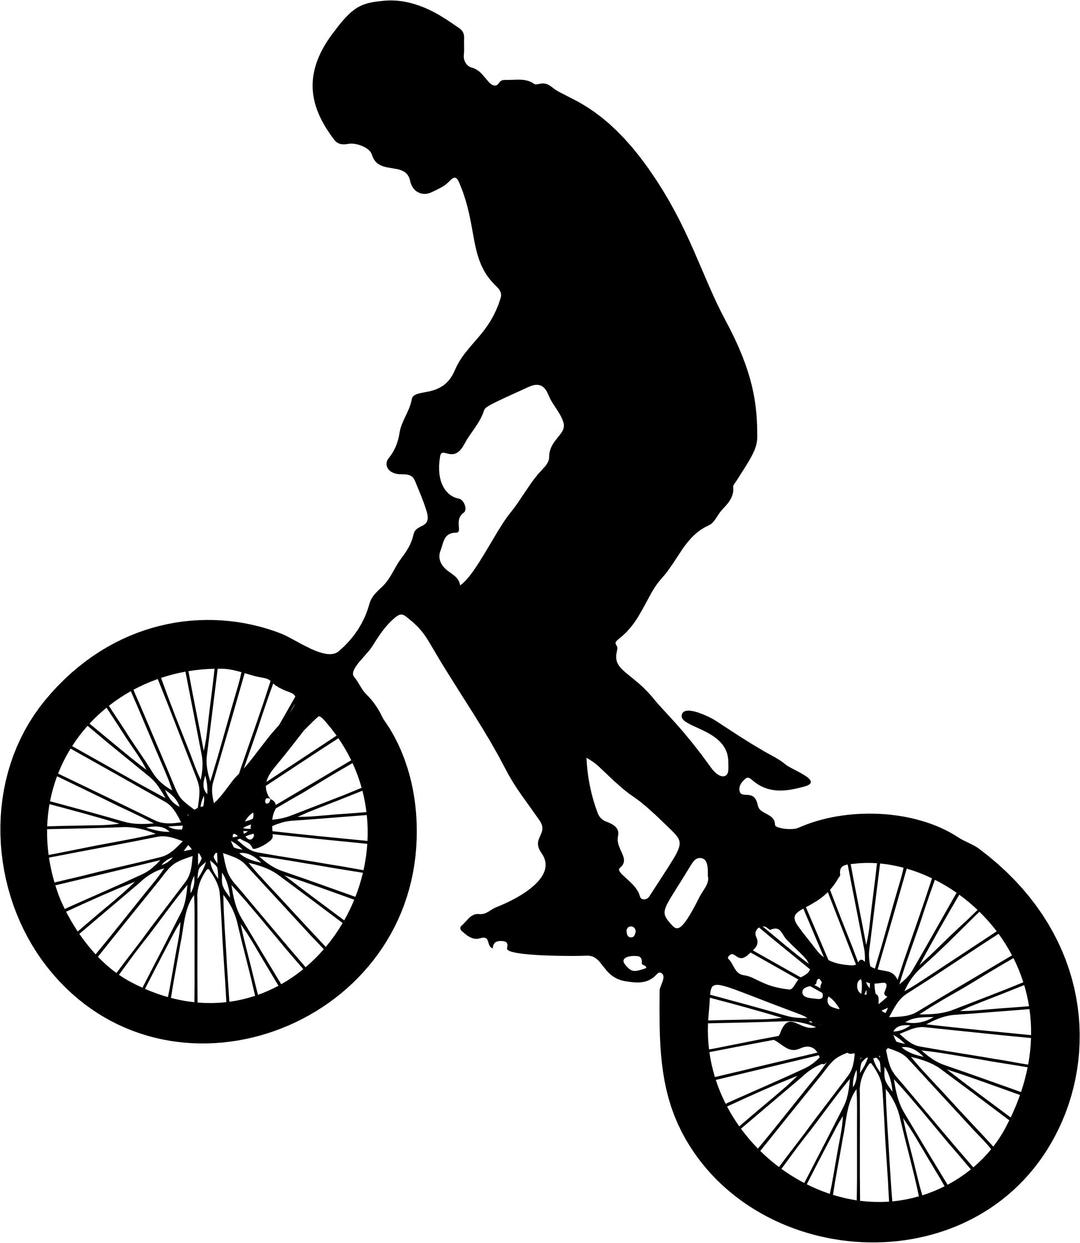 Man On Bike Silhouette png transparent